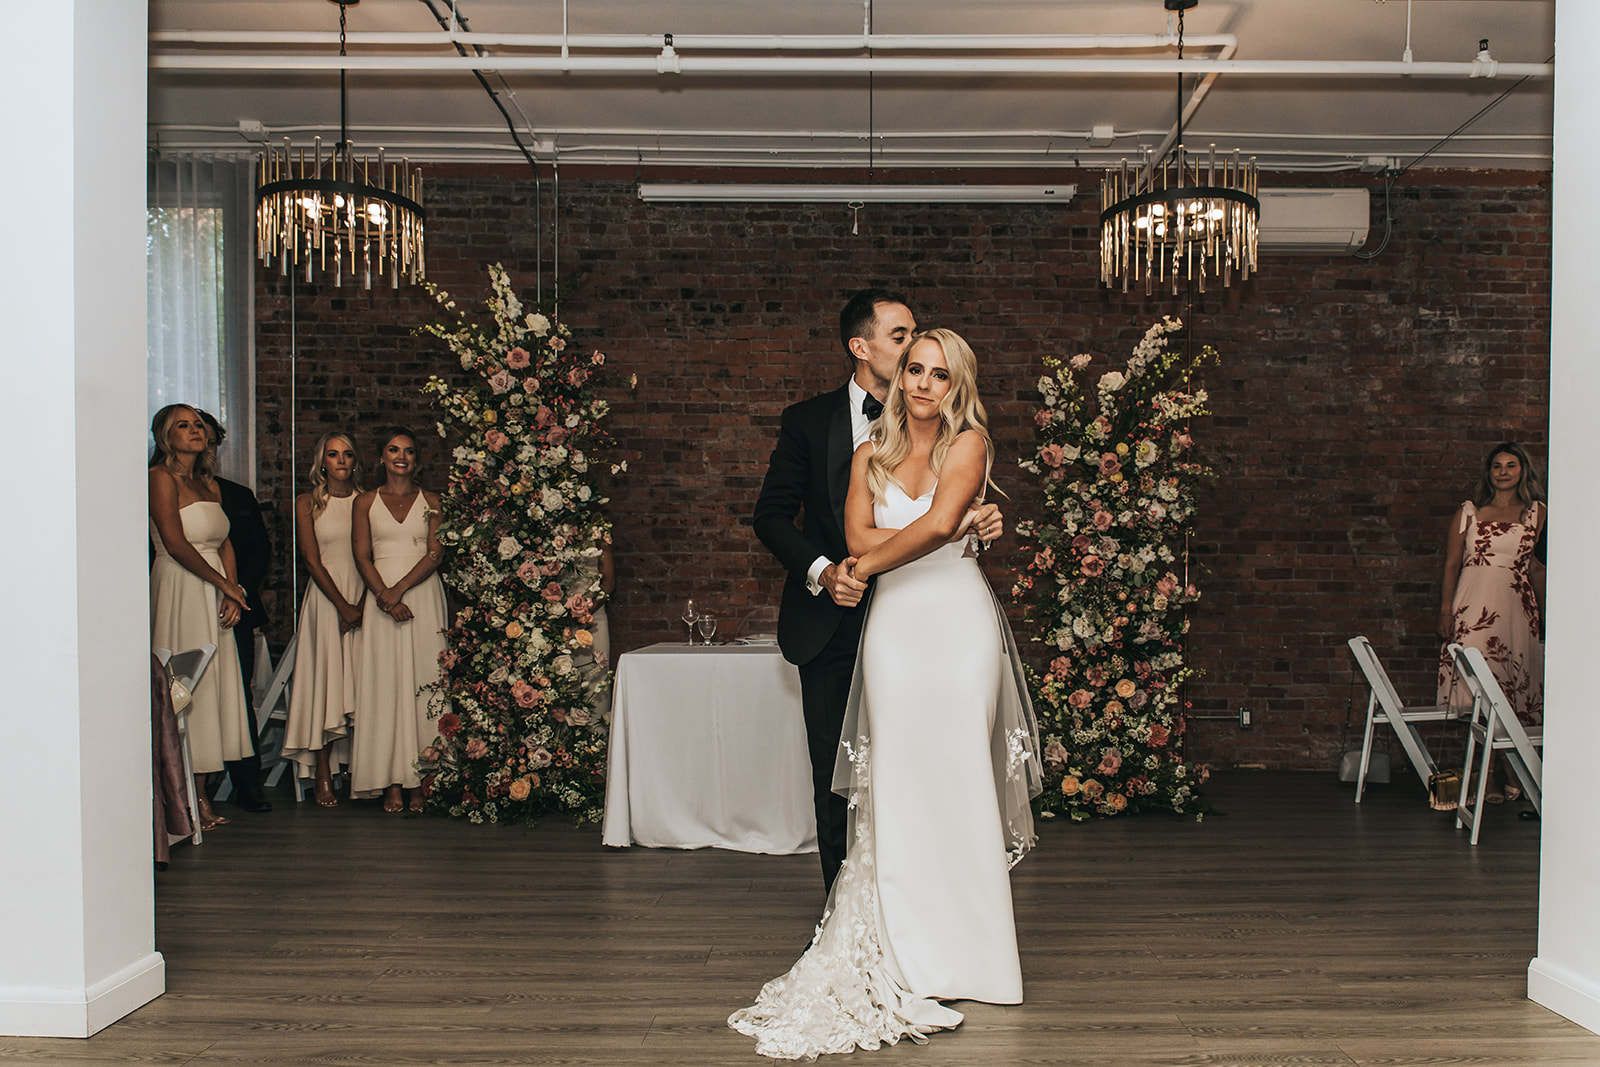 Cameron and Nicole’s Chic and Unforgettable Venue308 Summer Wedding
